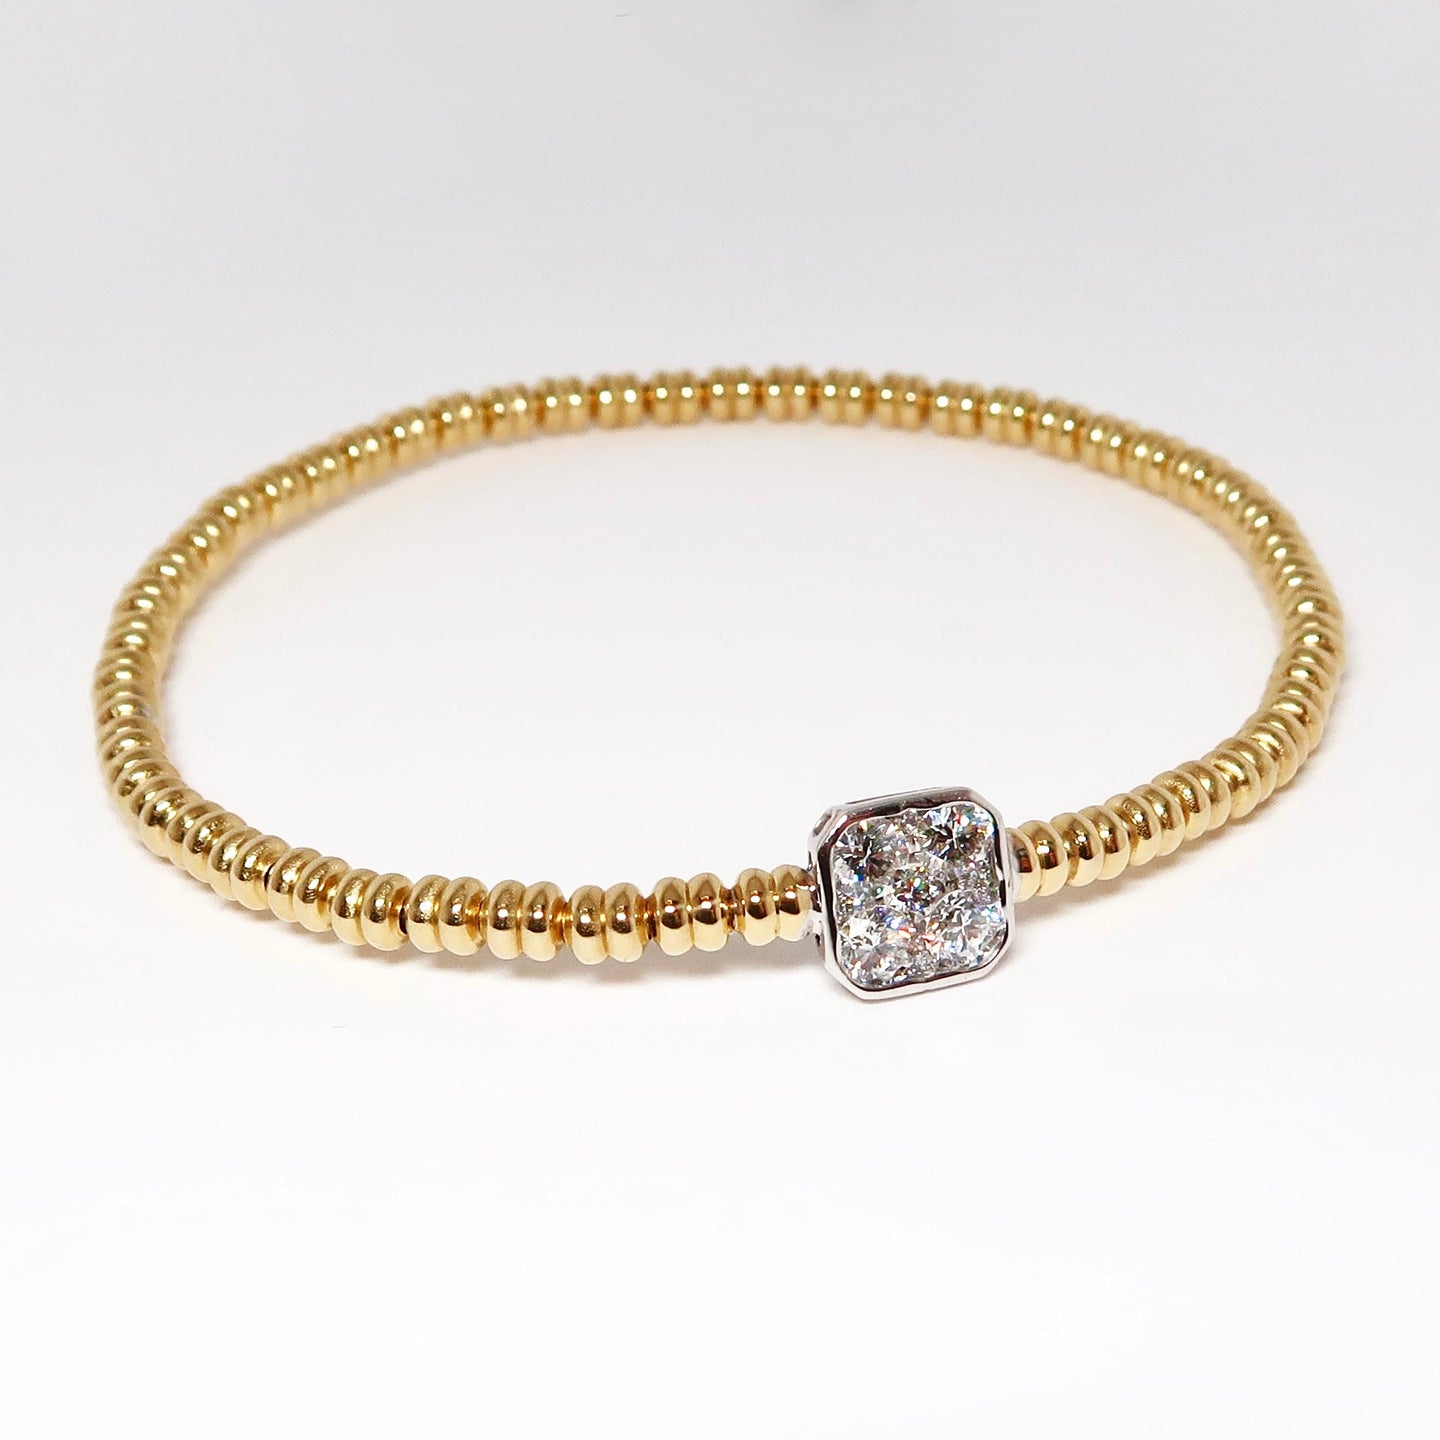 18k Yellow Gold Bangle with 18k White Gold Square Shaped Station with Diamonds